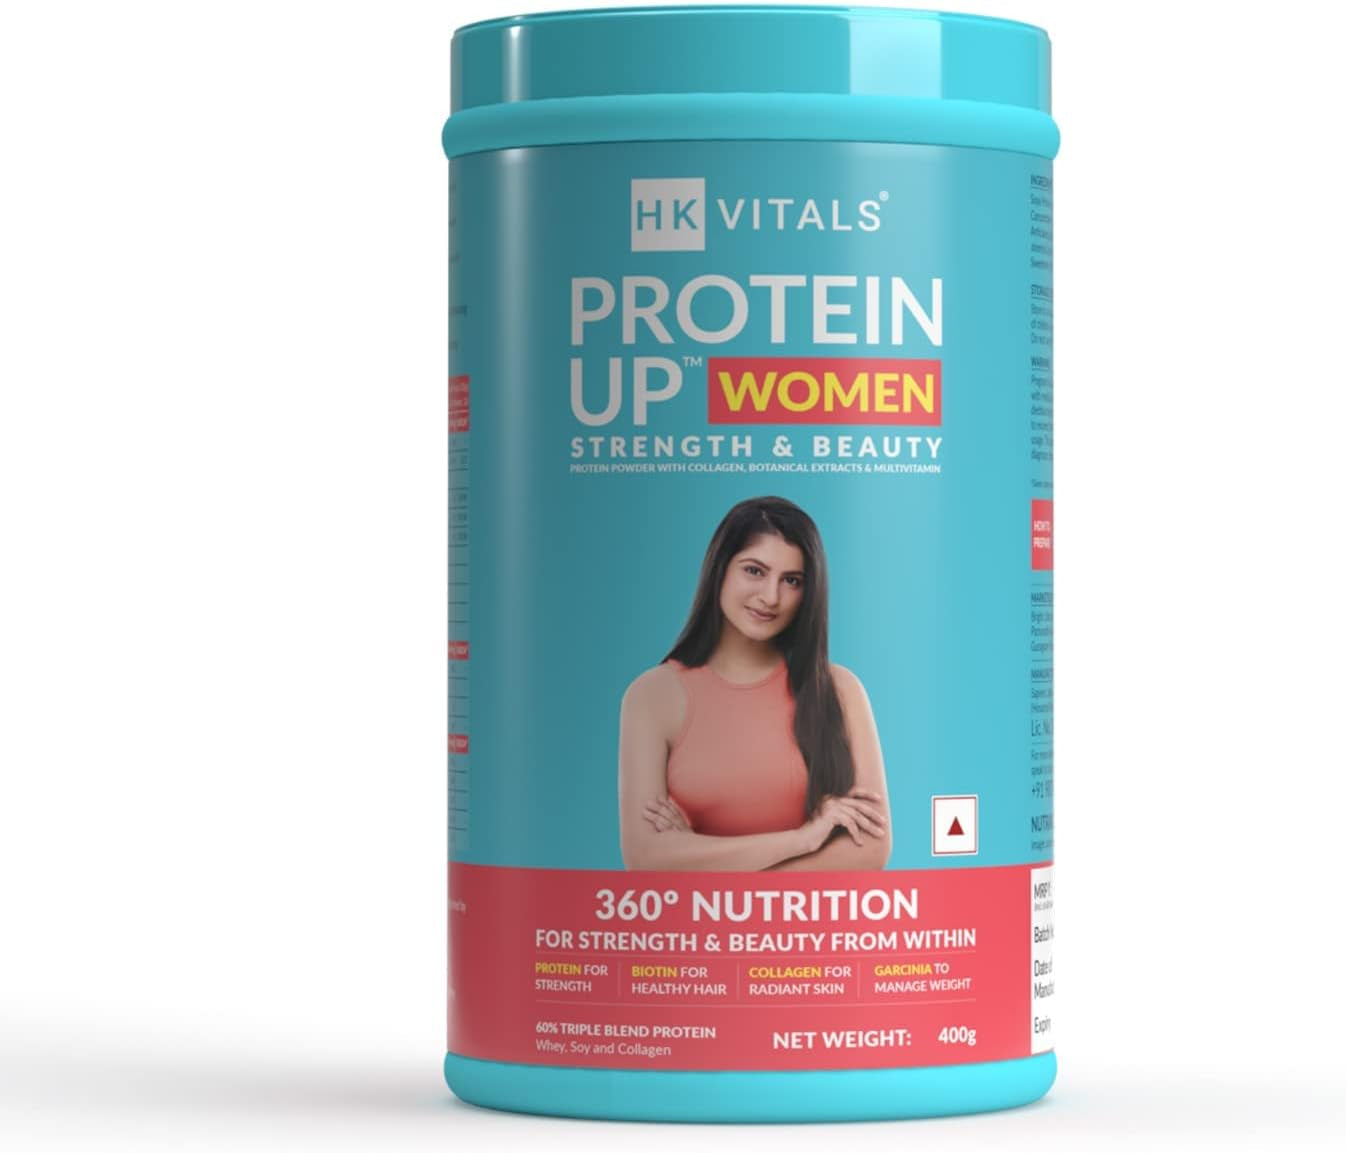 Goldy Vitals Proteinup Women with Soy, Whey Protein, Collagen, Vitamin C, E & Biotin for Strength and Beauty from within (Chocolate, 400 G / 0.88 Lb)